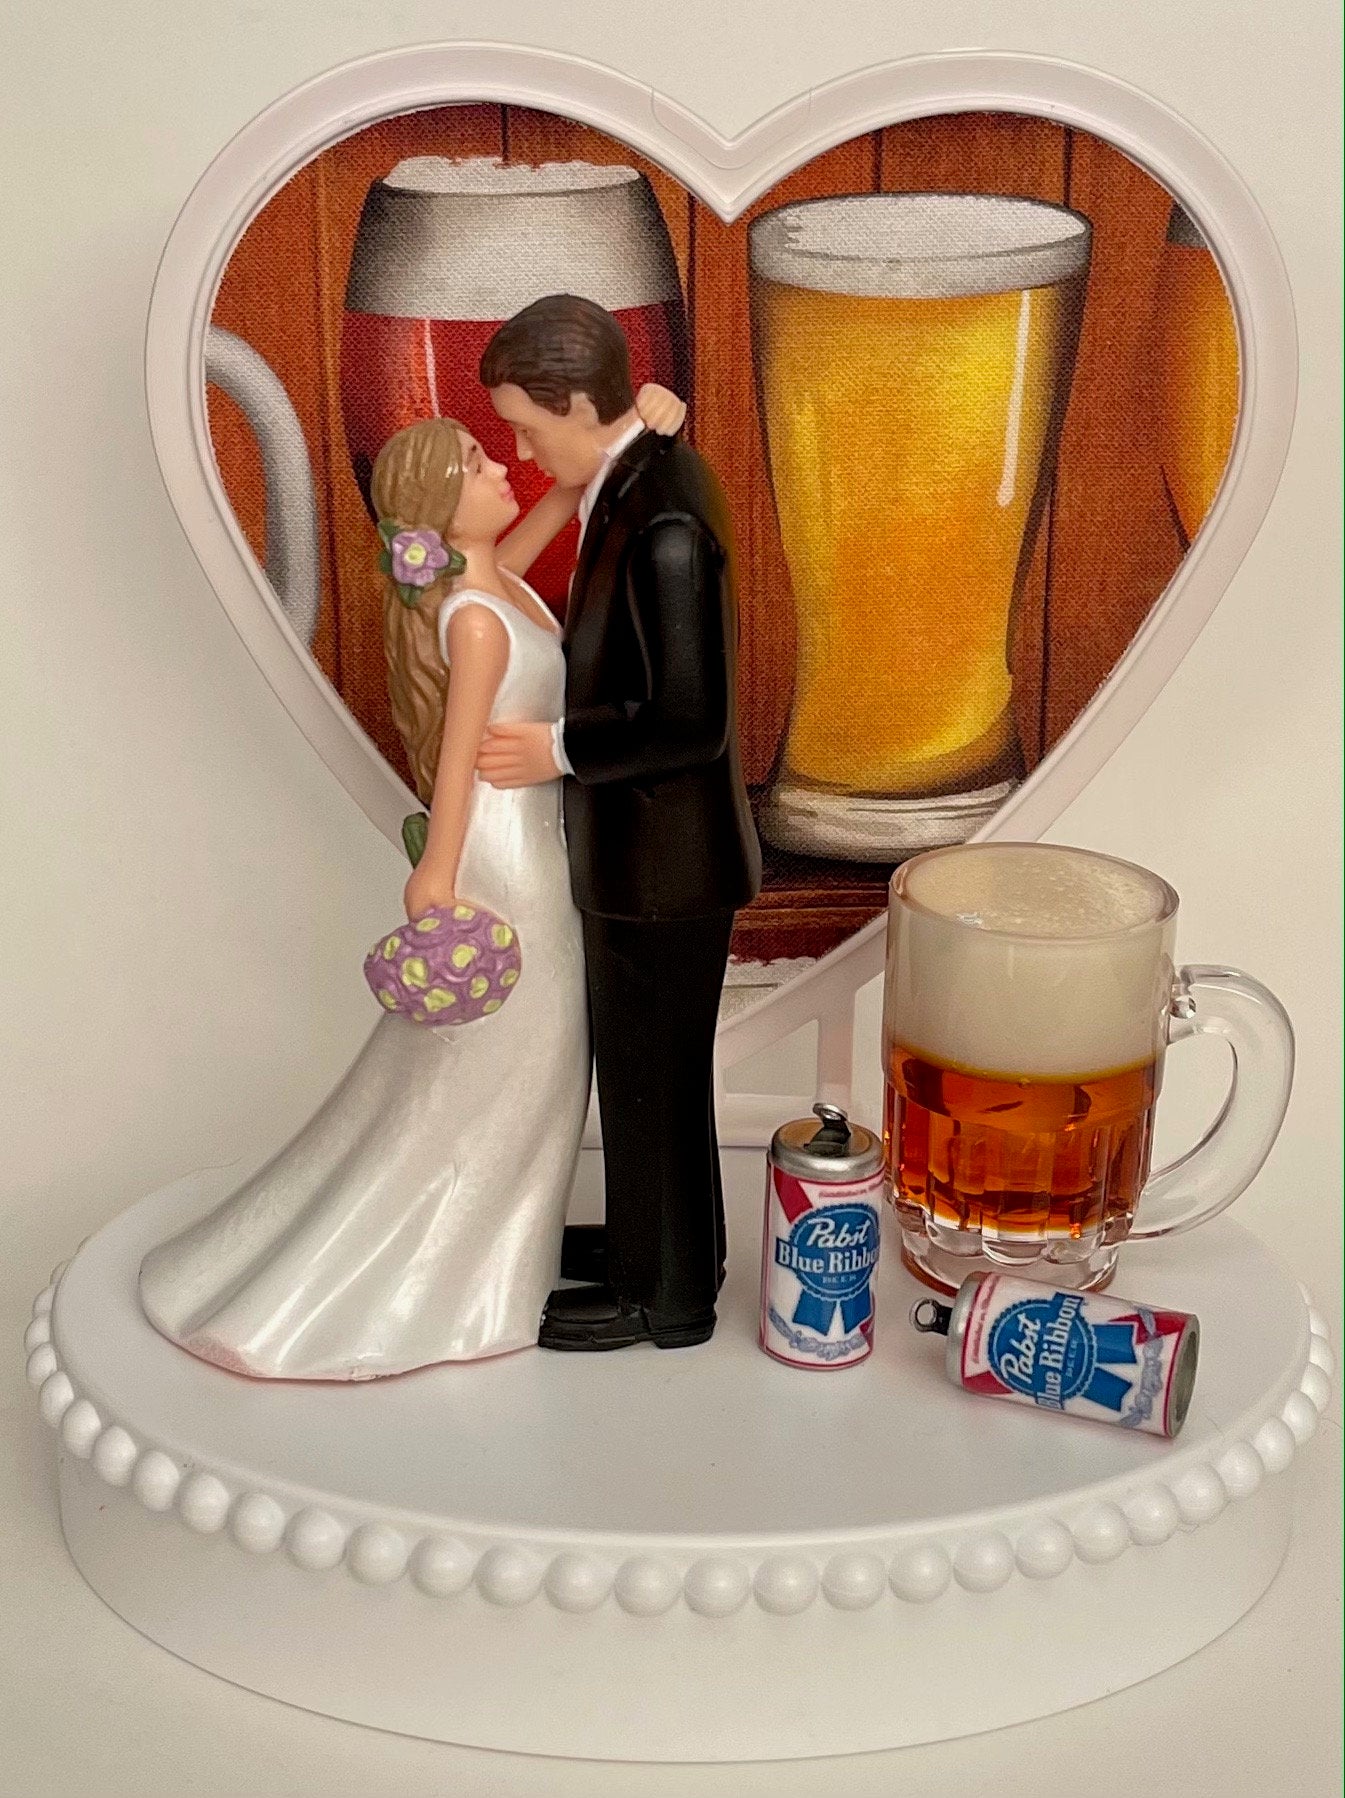 Wedding Cake Topper Pabst Blue Ribbon Beer Themed PBR Mug Cans Beautiful Long-Haired Bride Groom Bridal Shower Gift Unique Groom's Cake Top